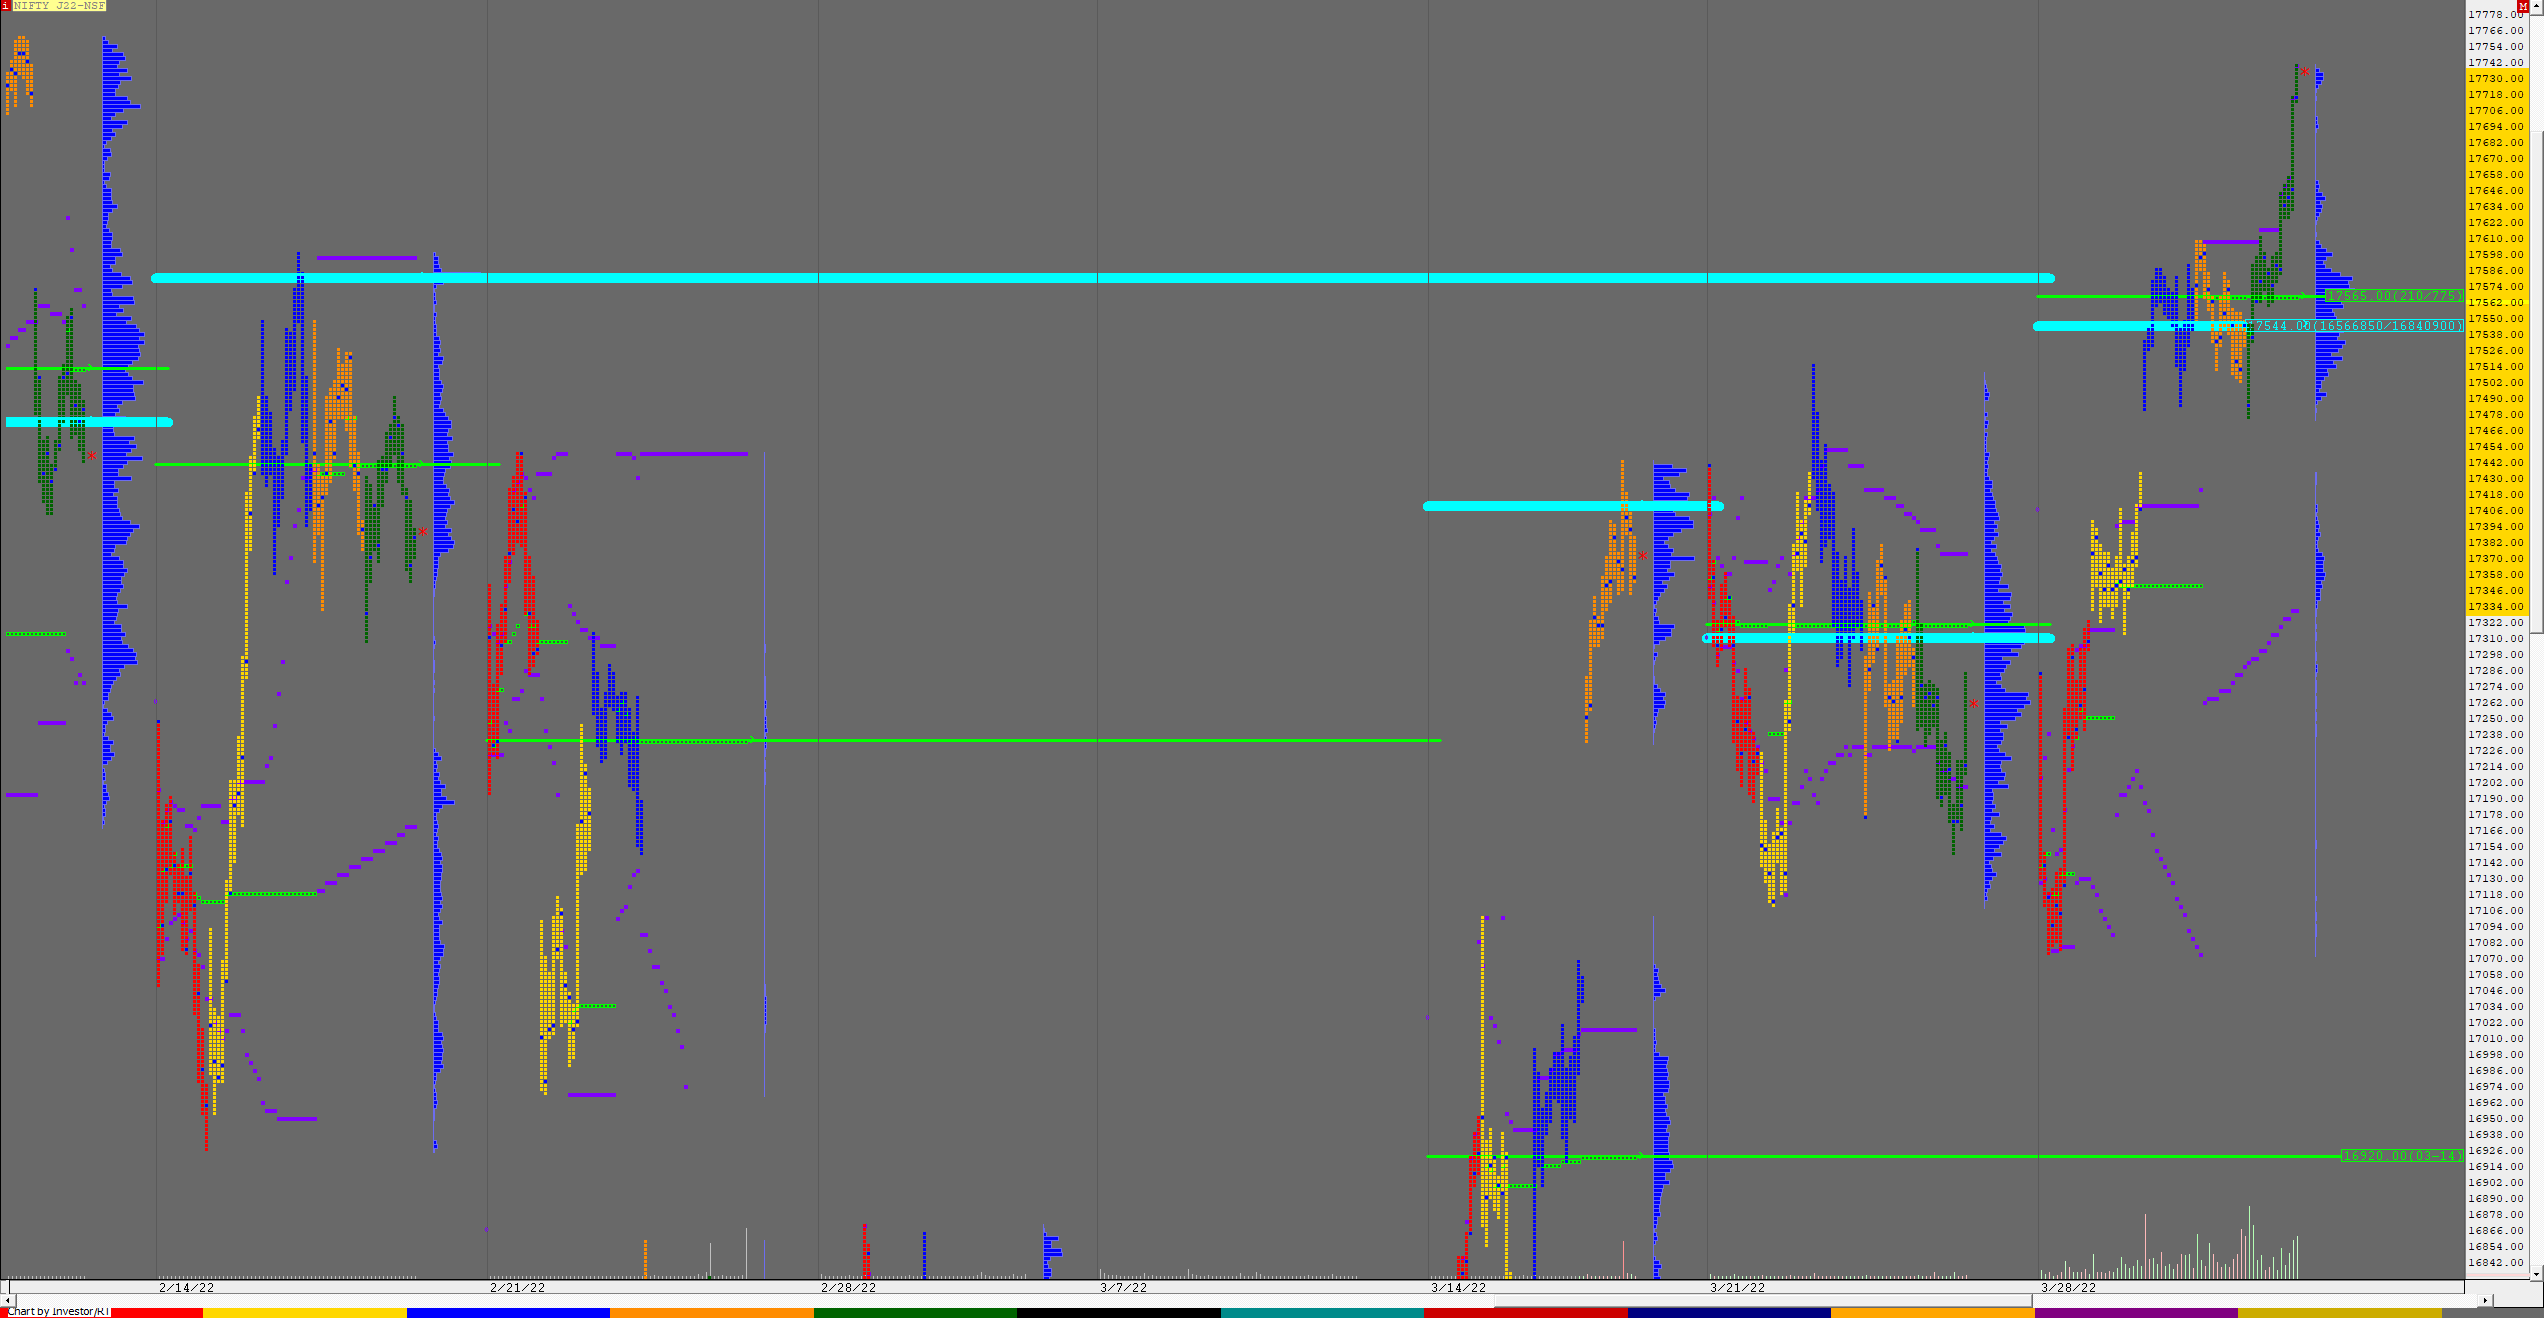 Nf F Weekly Charts (28Th Mar To 01St Apr 2022) And Market Profile Analysis Banknifty Futures, Charts, Day Trading, Intraday Trading, Intraday Trading Strategies, Market Profile, Market Profile Trading Strategies, Nifty Futures, Order Flow Analysis, Support And Resistance, Technical Analysis, Trading Strategies, Volume Profile Trading